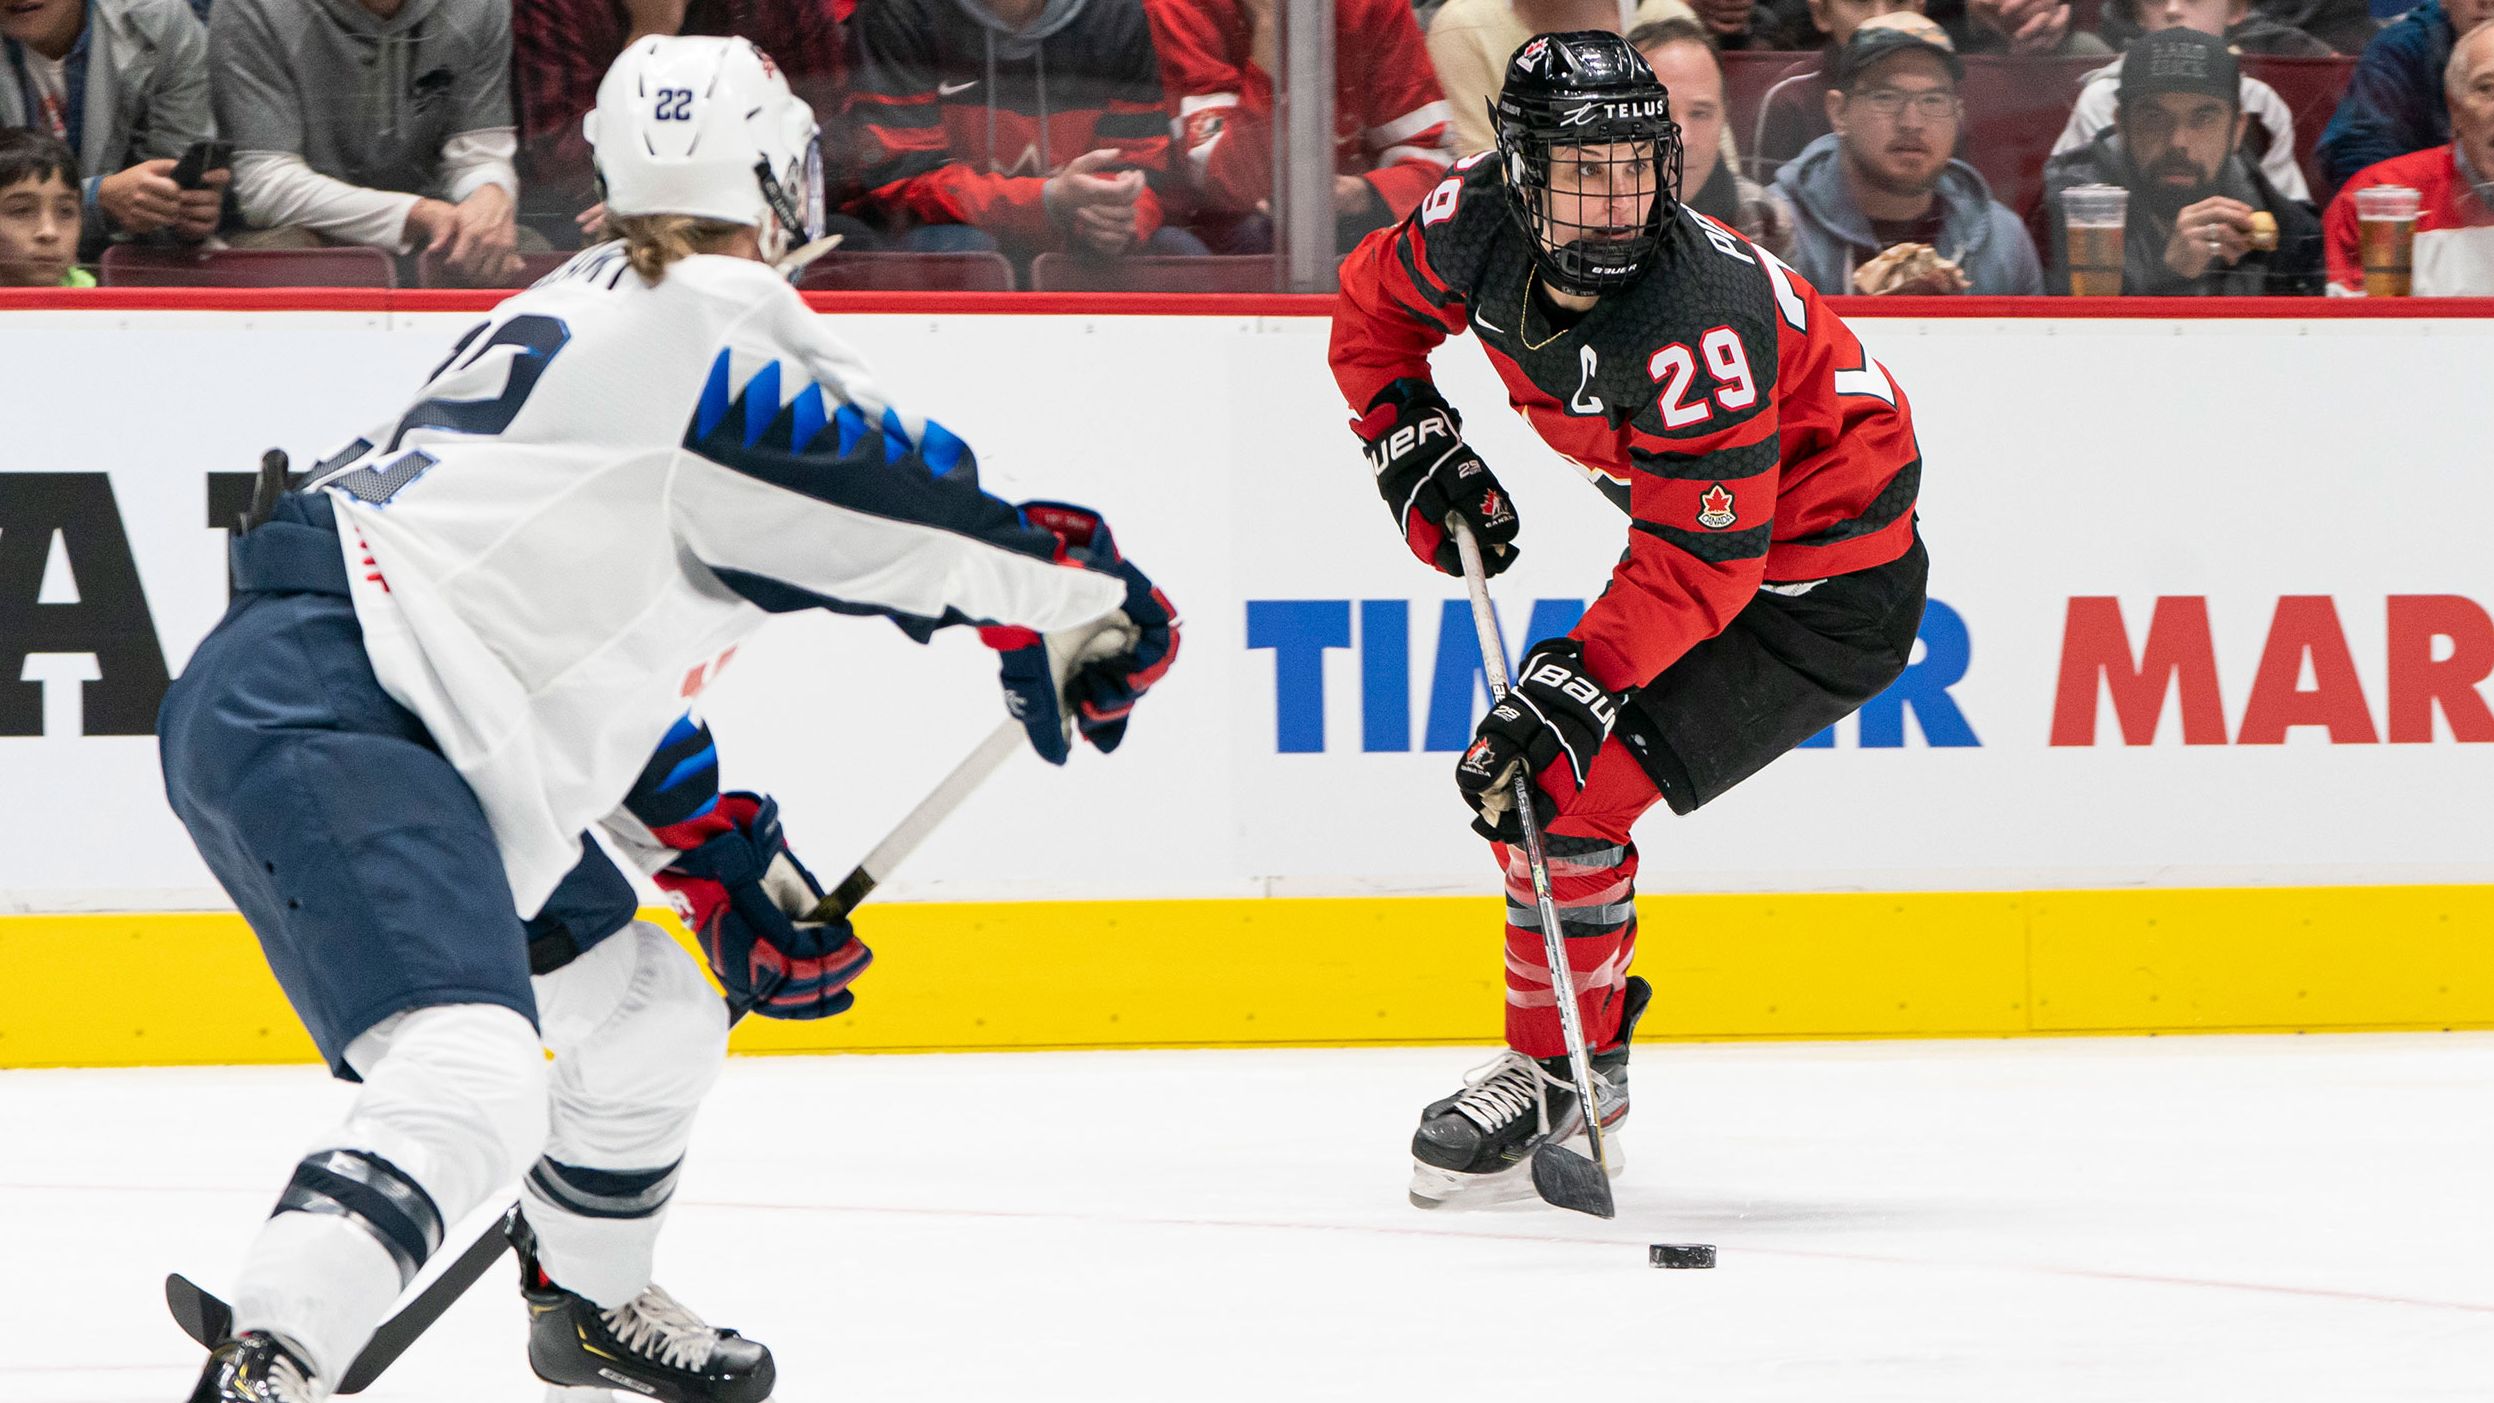 <strong>Marie-Philip Poulin (Canada):</strong> Poulin, one of the greatest women's hockey players of all time, received the nickname "Captain Clutch" after scoring the game-winning goals in both the 2010 and 2014 Olympic finals. She also scored in the 2018 gold-medal game, but the Canadians lost to the United States in a <a href="https://www.cnn.com/2018/02/22/sport/olympics-ice-hockey-canada-us-intl/index.html" target="_blank">dramatic penalty shootout.</a> Poulin, 30, will lead Team Canada again in China.